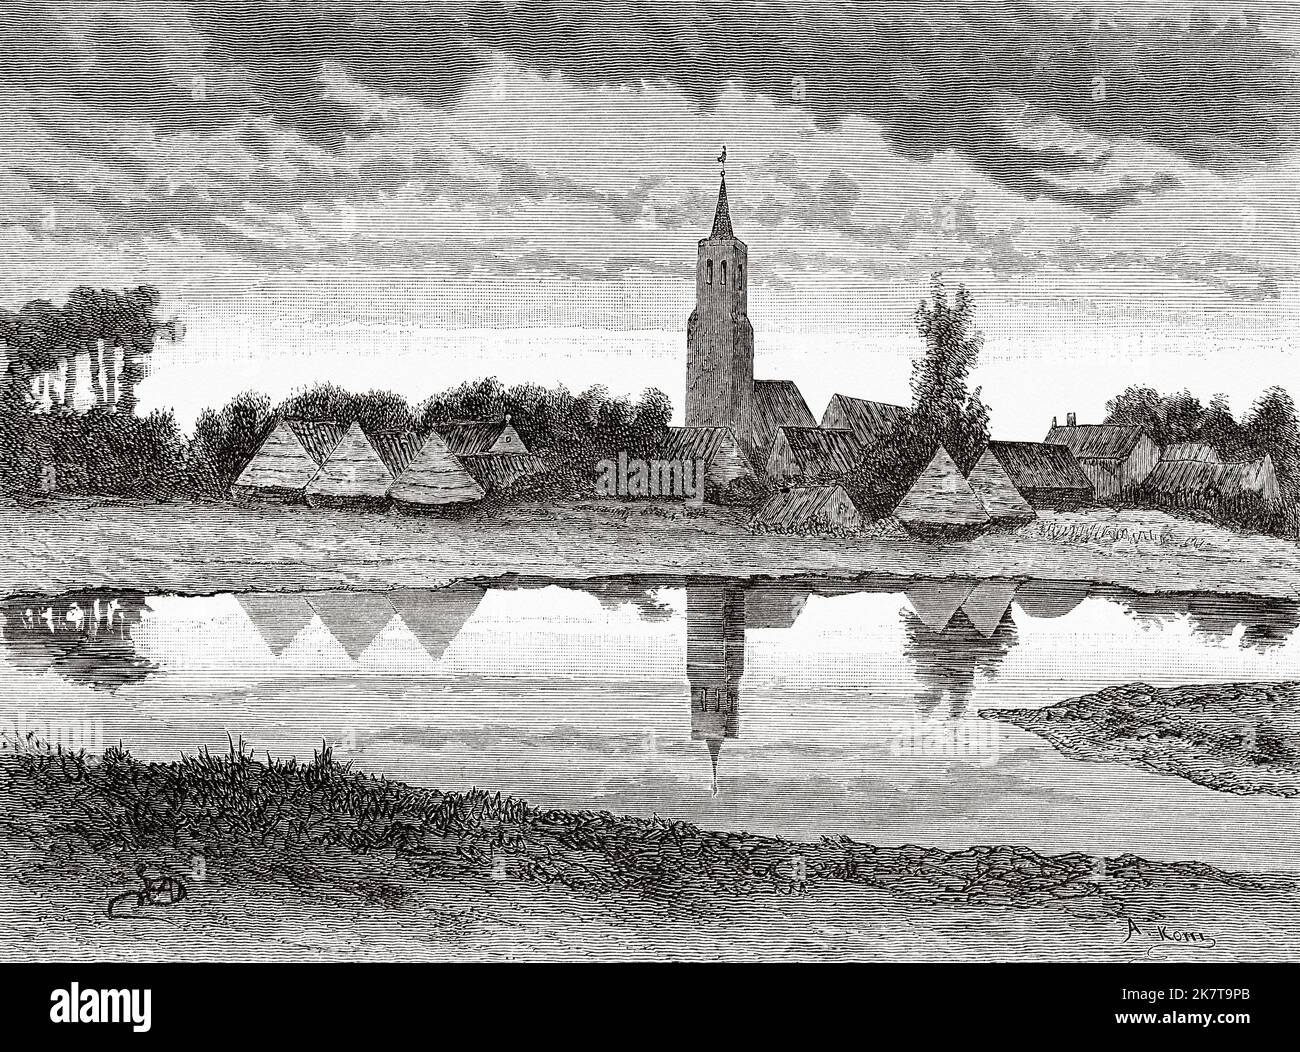 Wissekerke, village in the municipality of Goes in the Dutch province of Zeeland. Netherlands, Europe. Trip to the Zeeland by Charles De Coster 1873 Stock Photo